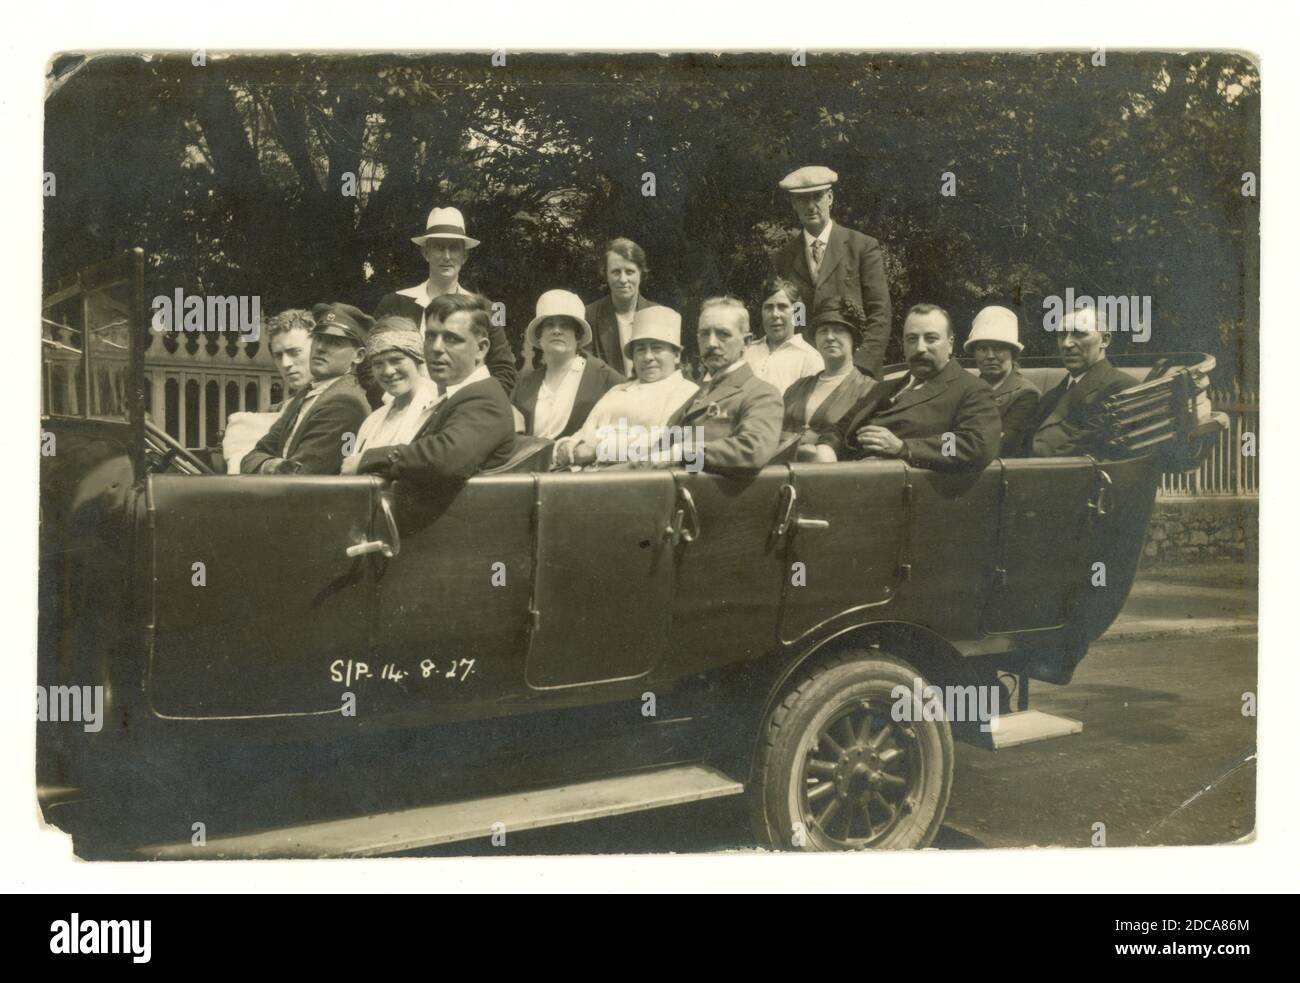 Original 1920s postcard of a charabanc outing, complete with chauffeur wearing a cap. The women wear cloche hats fashionable at the time, dated 14 Aug 1927 on front. Albert Smith Ltd. Jersey, U.K Stock Photo